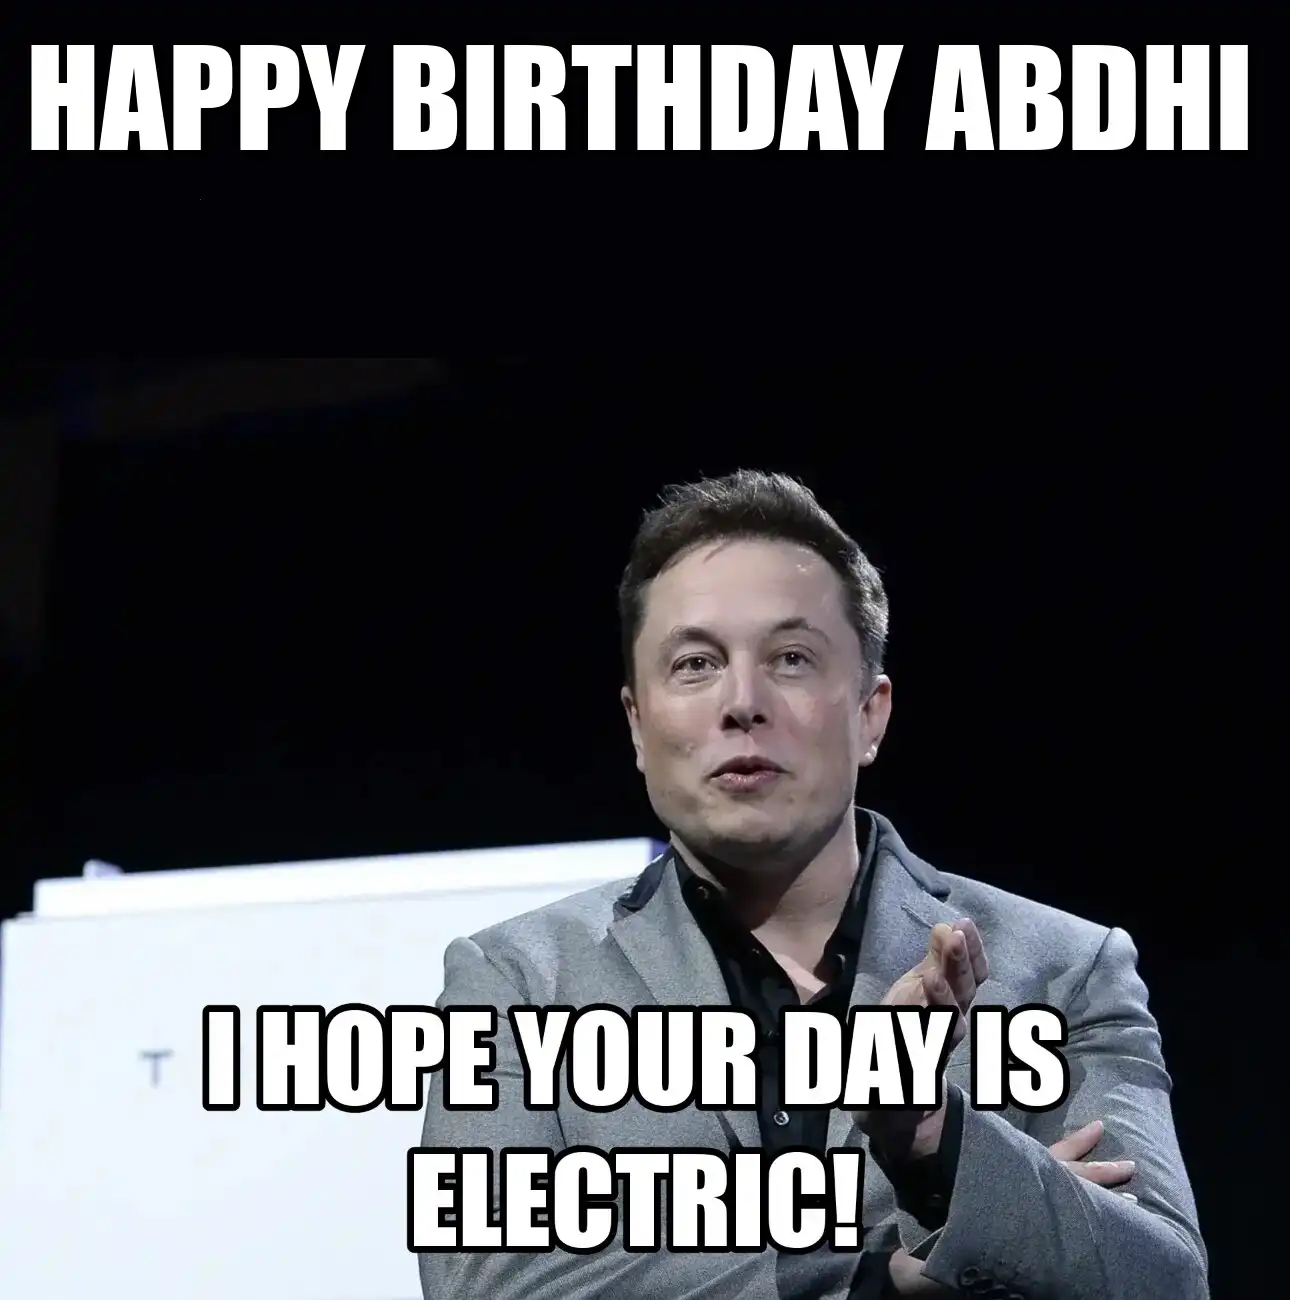 Happy Birthday Abdhi I Hope Your Day Is Electric Meme